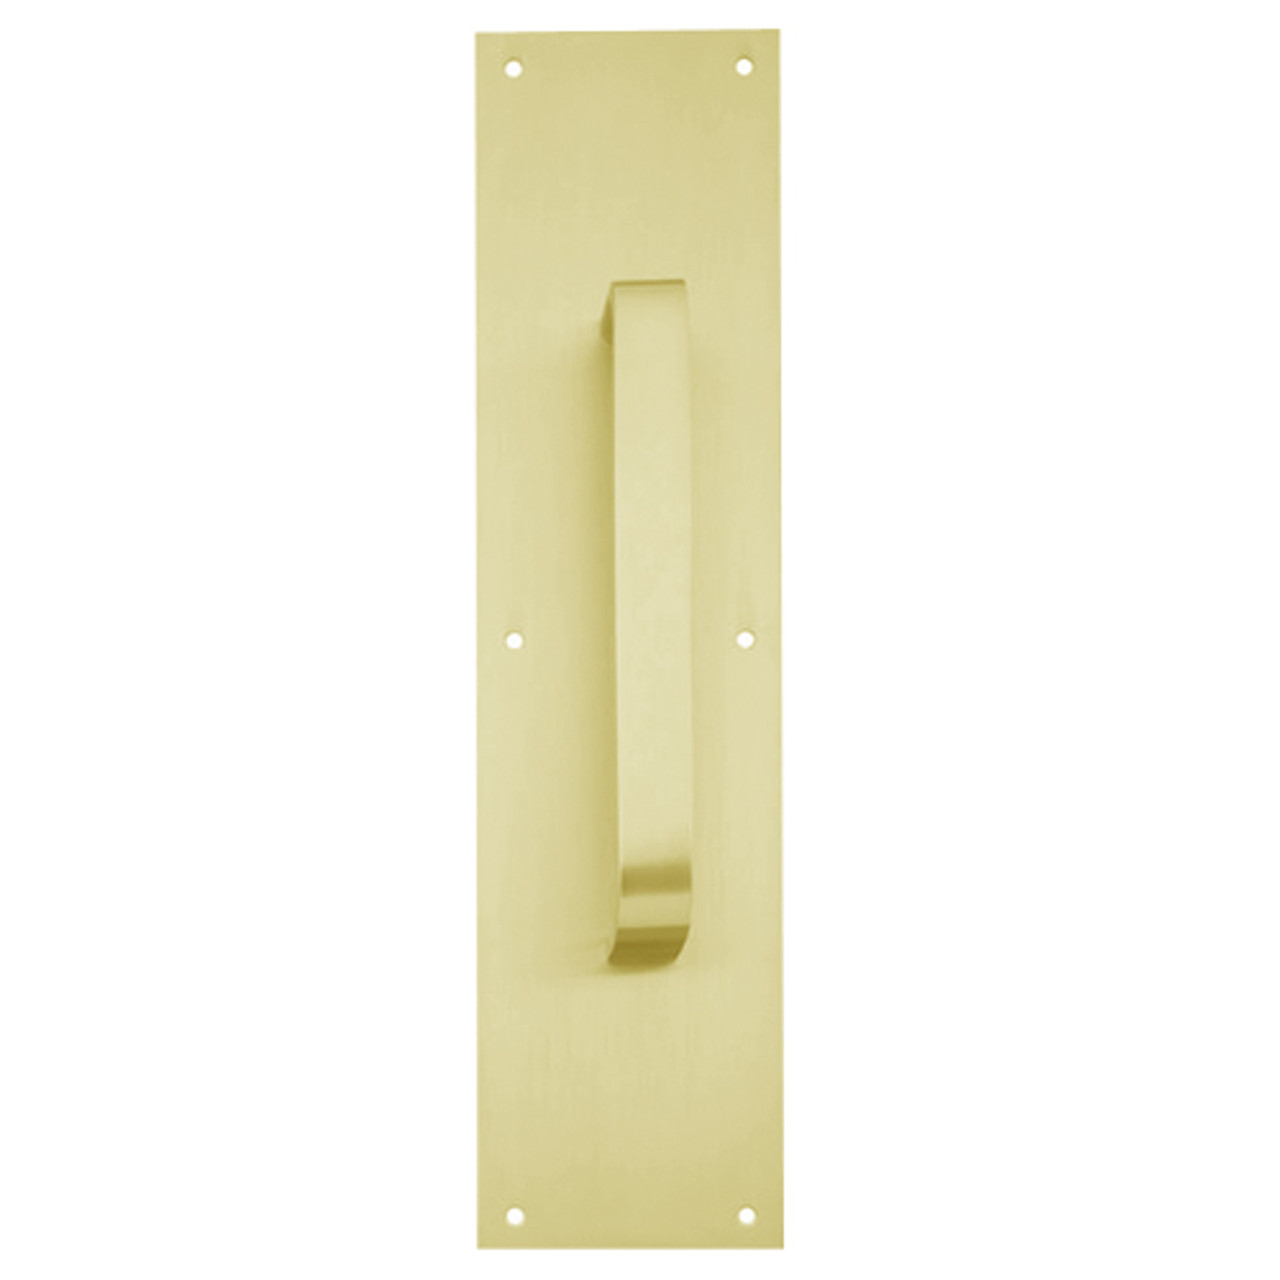 8305-8-US4-6x16 IVES Architectural Door Trim 6x16 Inch Pull Plate in Satin Brass